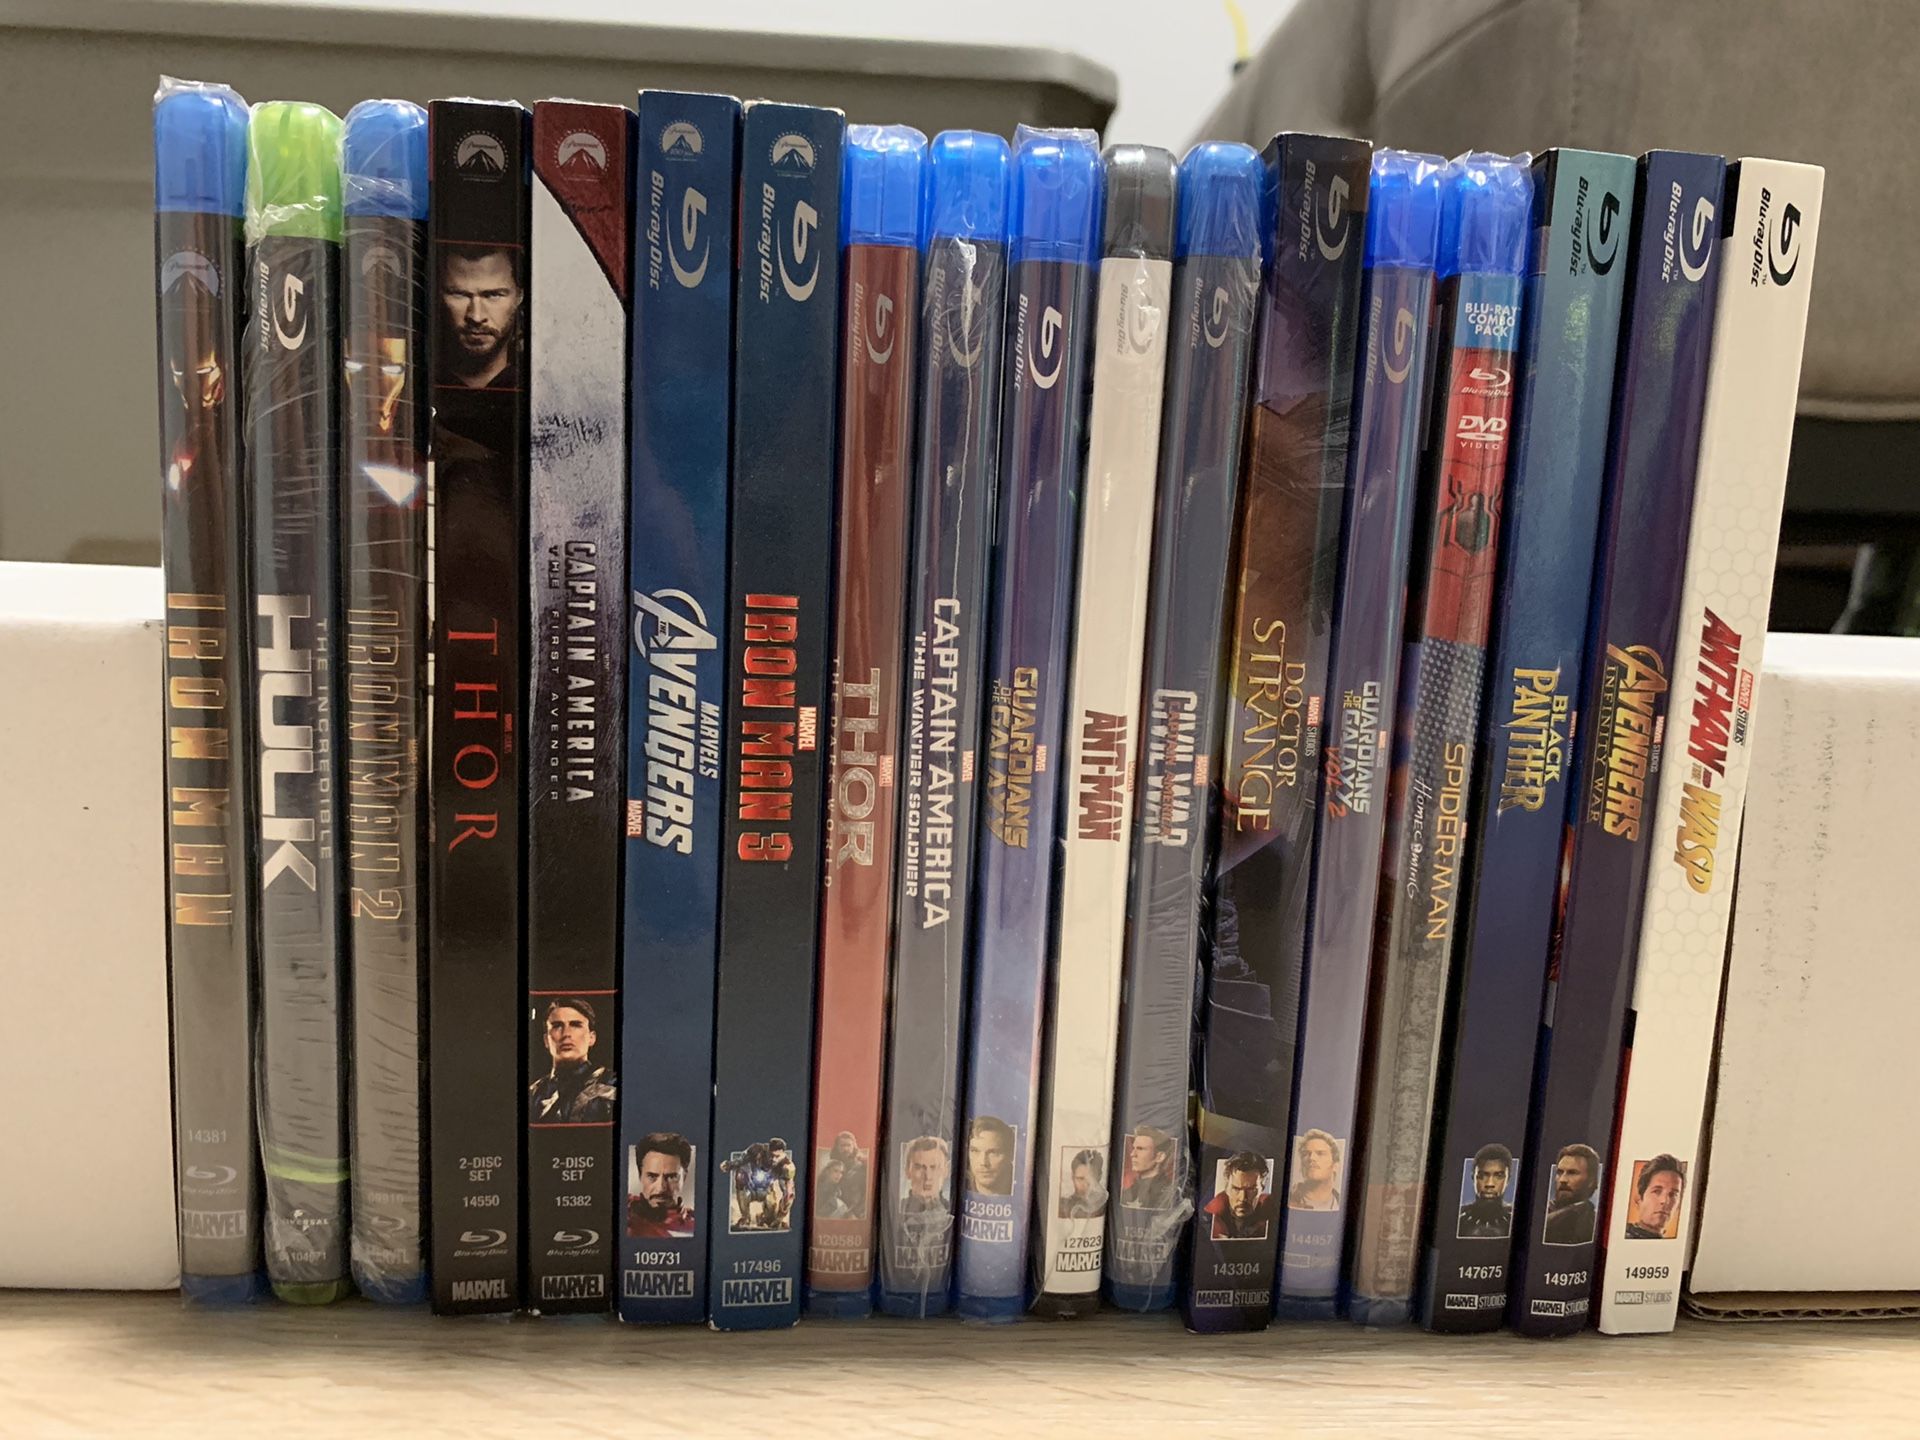 Marvel blu ray movie collection